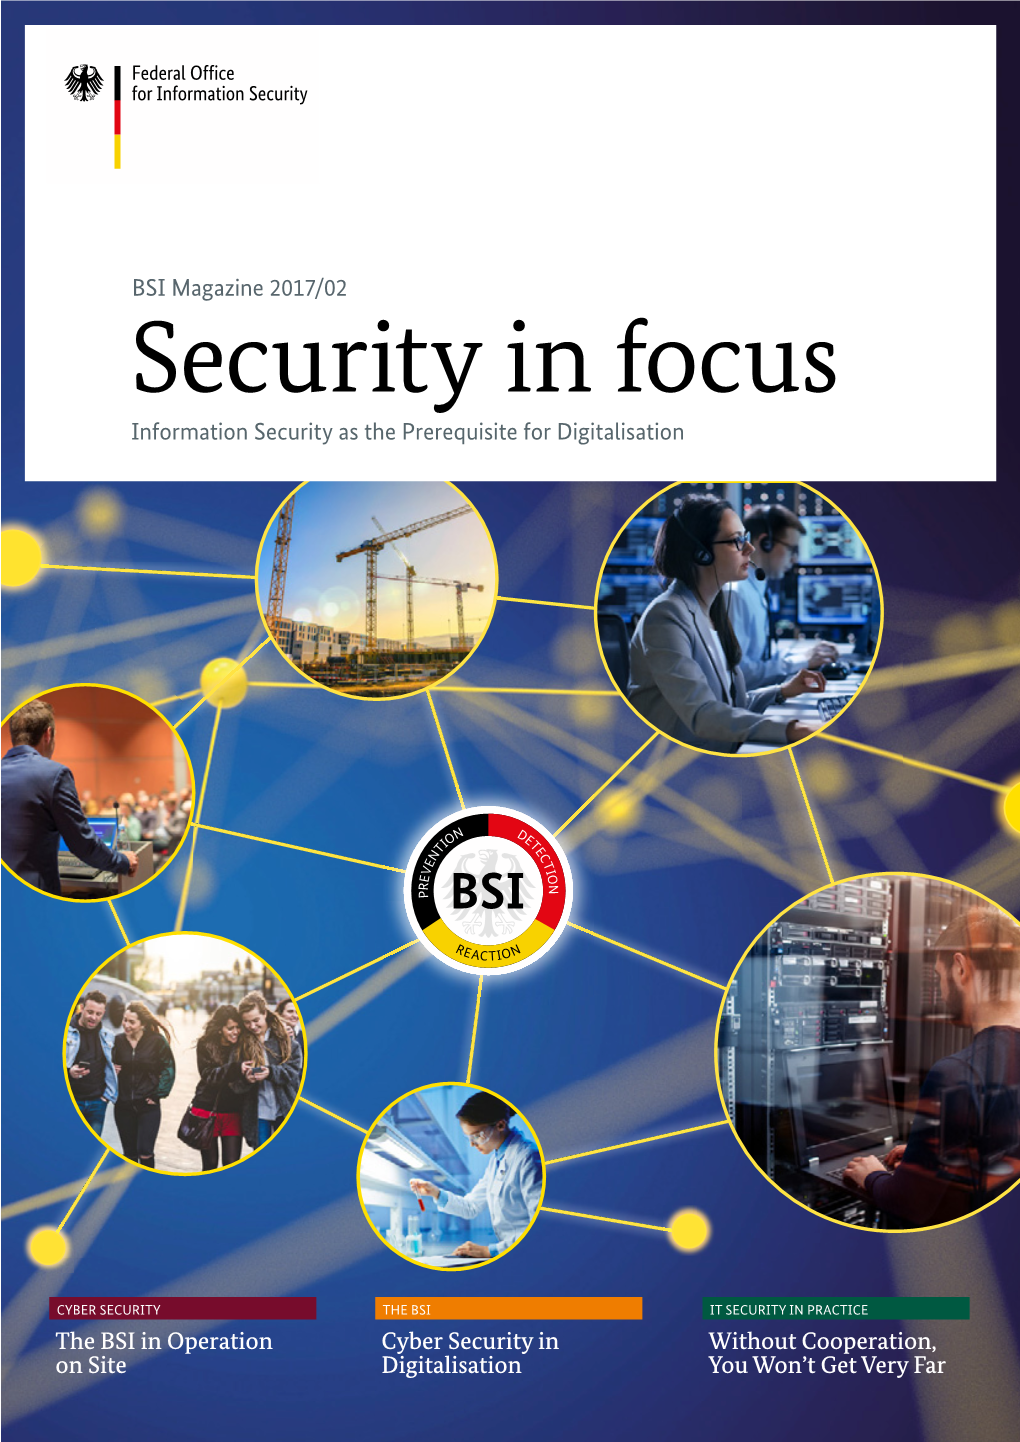 BSI Magazine 2017/02 Security in Focus Information Security As the Prerequisite for Digitalisation